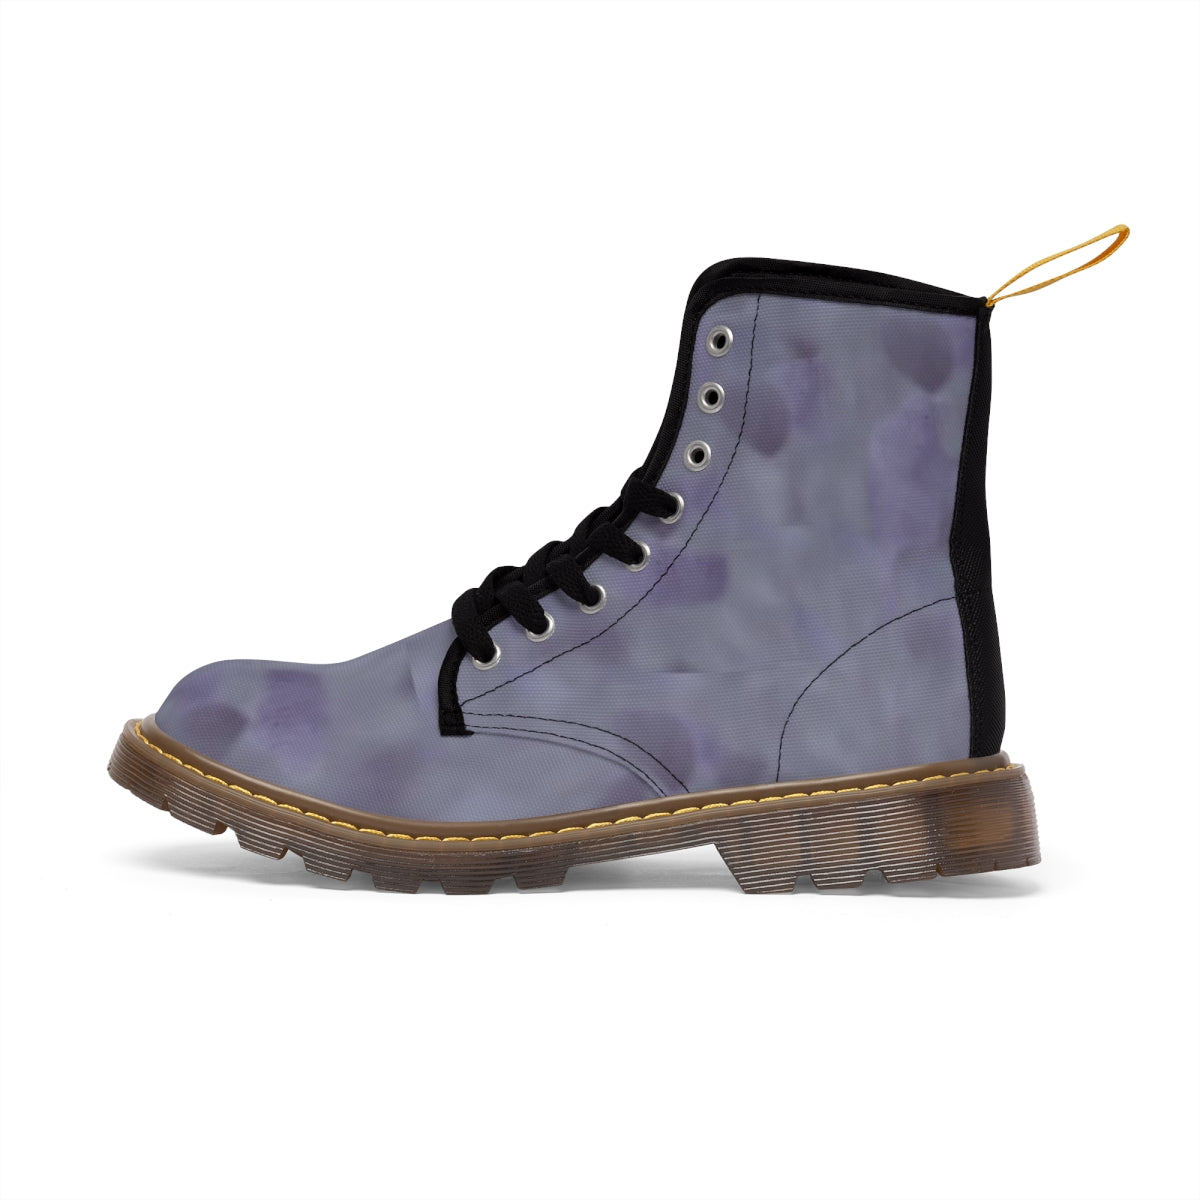 Pastel Dreams Bee Women's Canvas Boots Shoes Bee boots combat boots fun womens boots original art boots Pastel Dreams Bee Shoes unique womens boots vegan boots vegan combat boots womens boots womens fashion boots womens purple boots